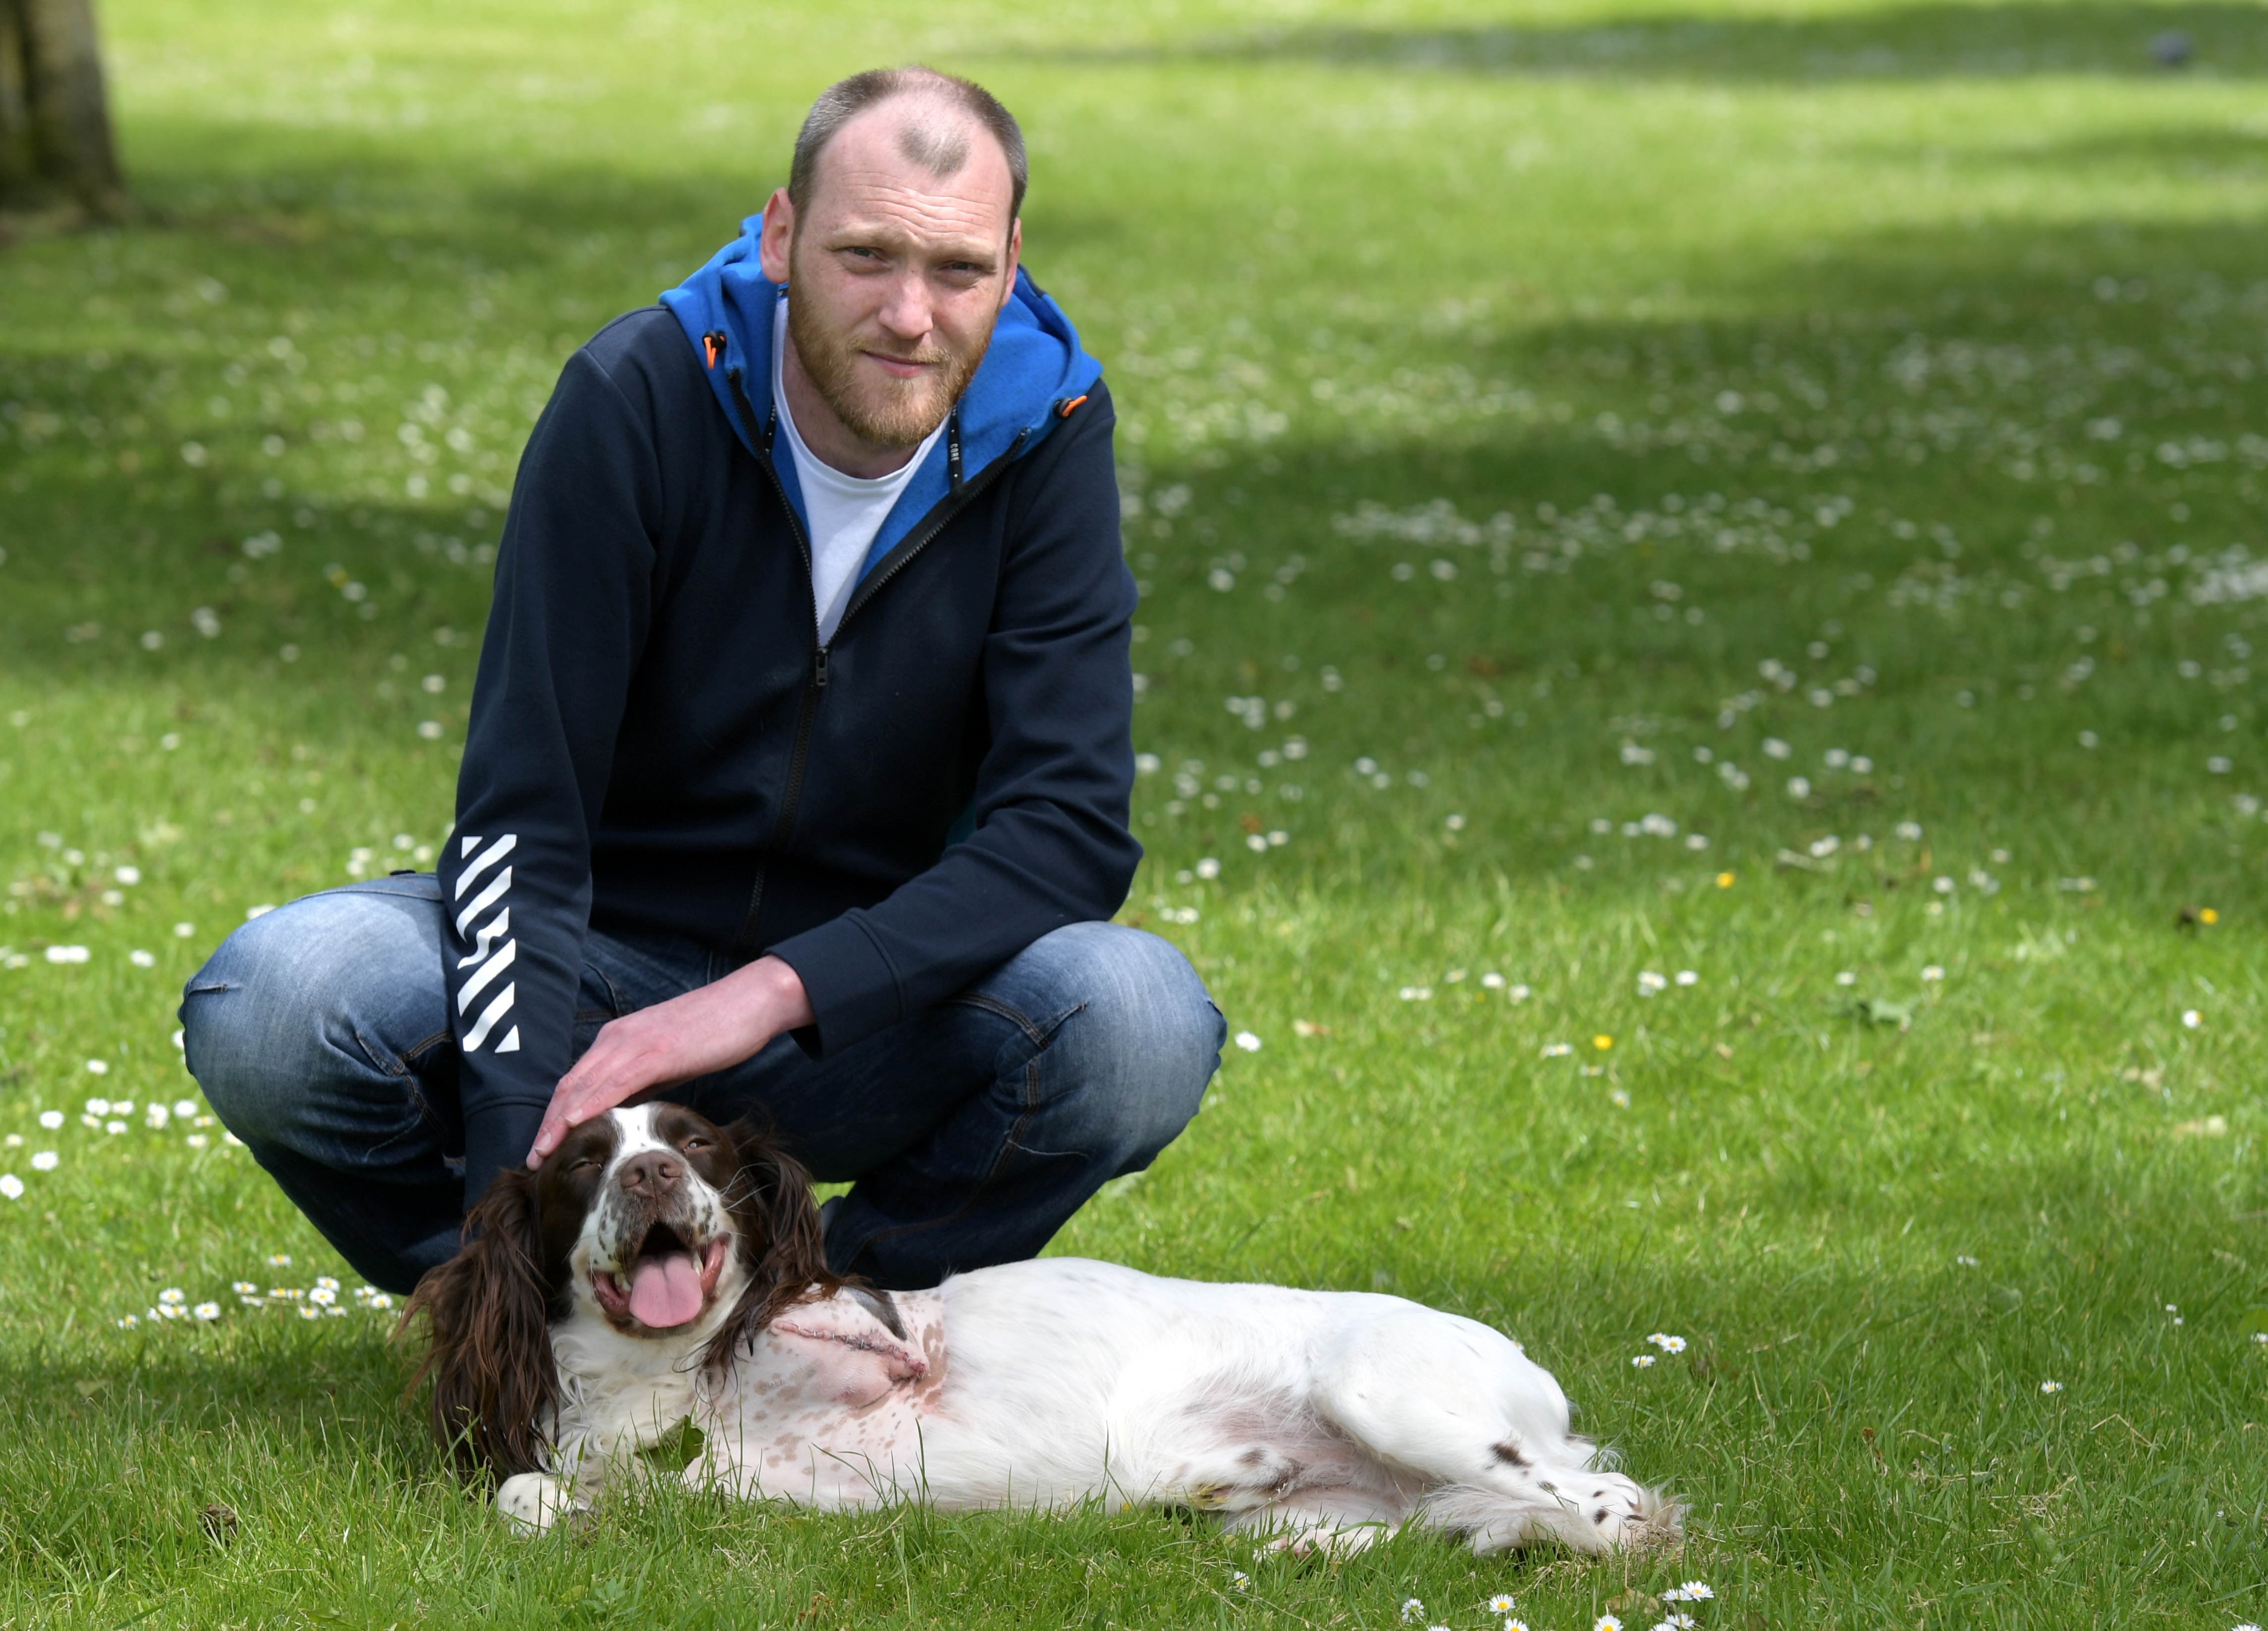 John Holt's dog lost a leg after falling down a hole. He blames the council for not filling it. Pictured is John with his dog Elmo. by Kath Flannerty